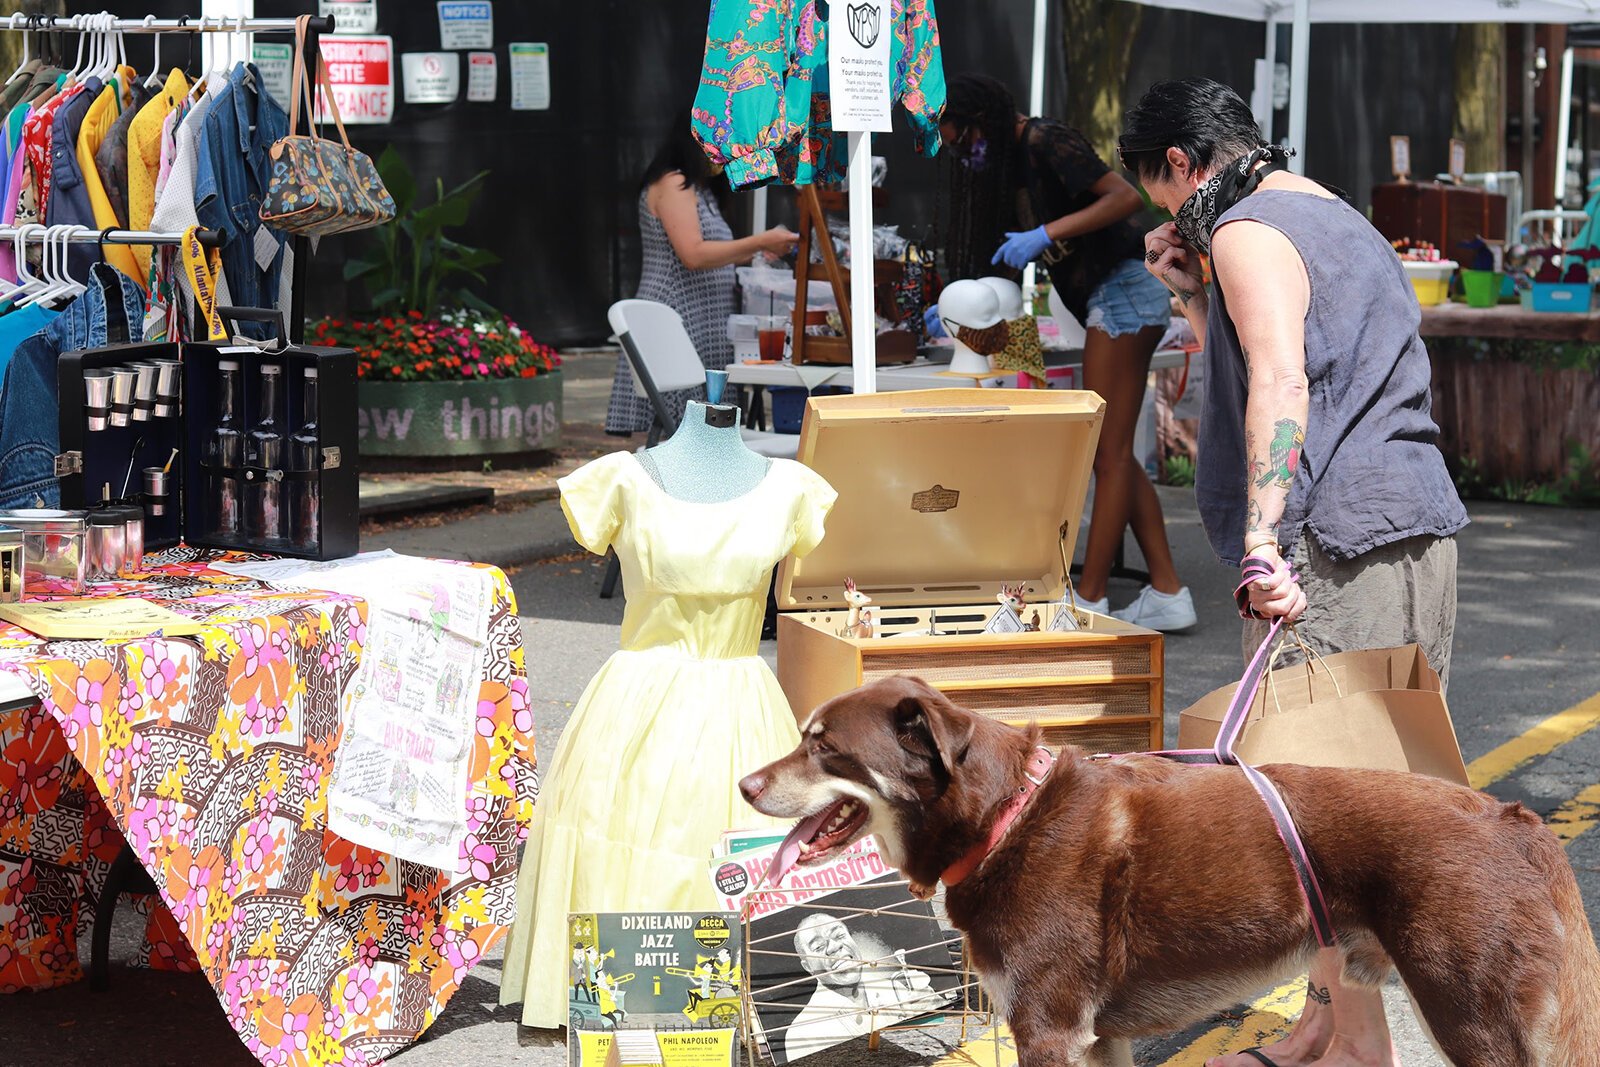 A customer browses a pop-up market hosted by The Back Office Studio.